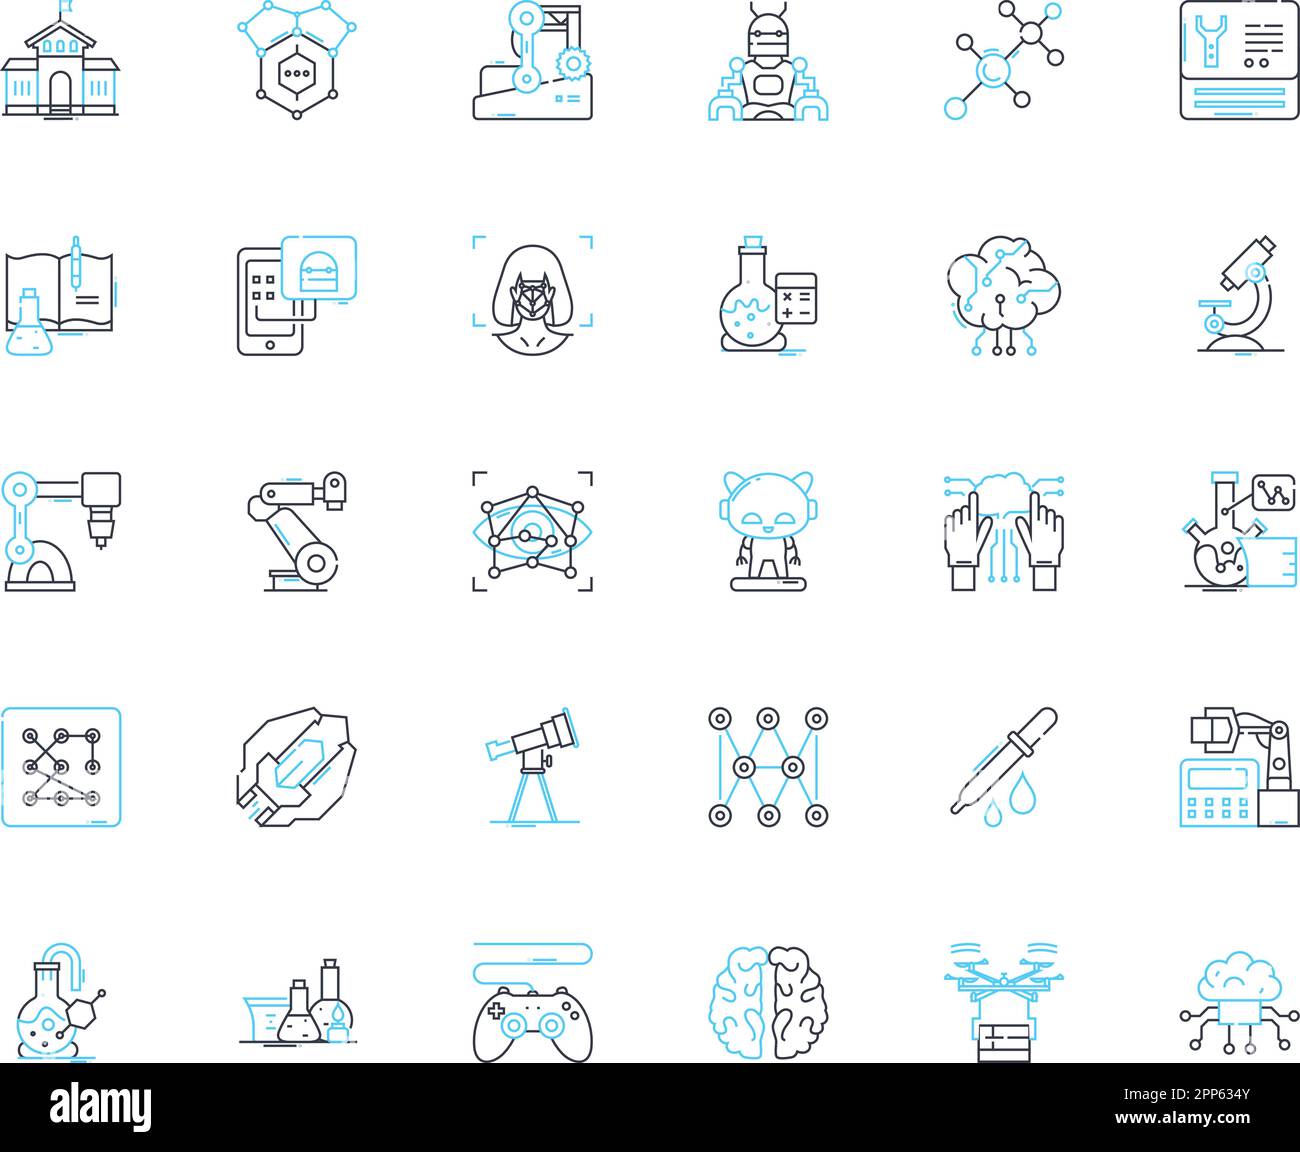 Nuclear Energy linear icons set. Fission, Fusion, Reactor, Radiation, Uranium, Plutonium, Electricity line vector and concept signs. Isotope,Chain Stock Vector